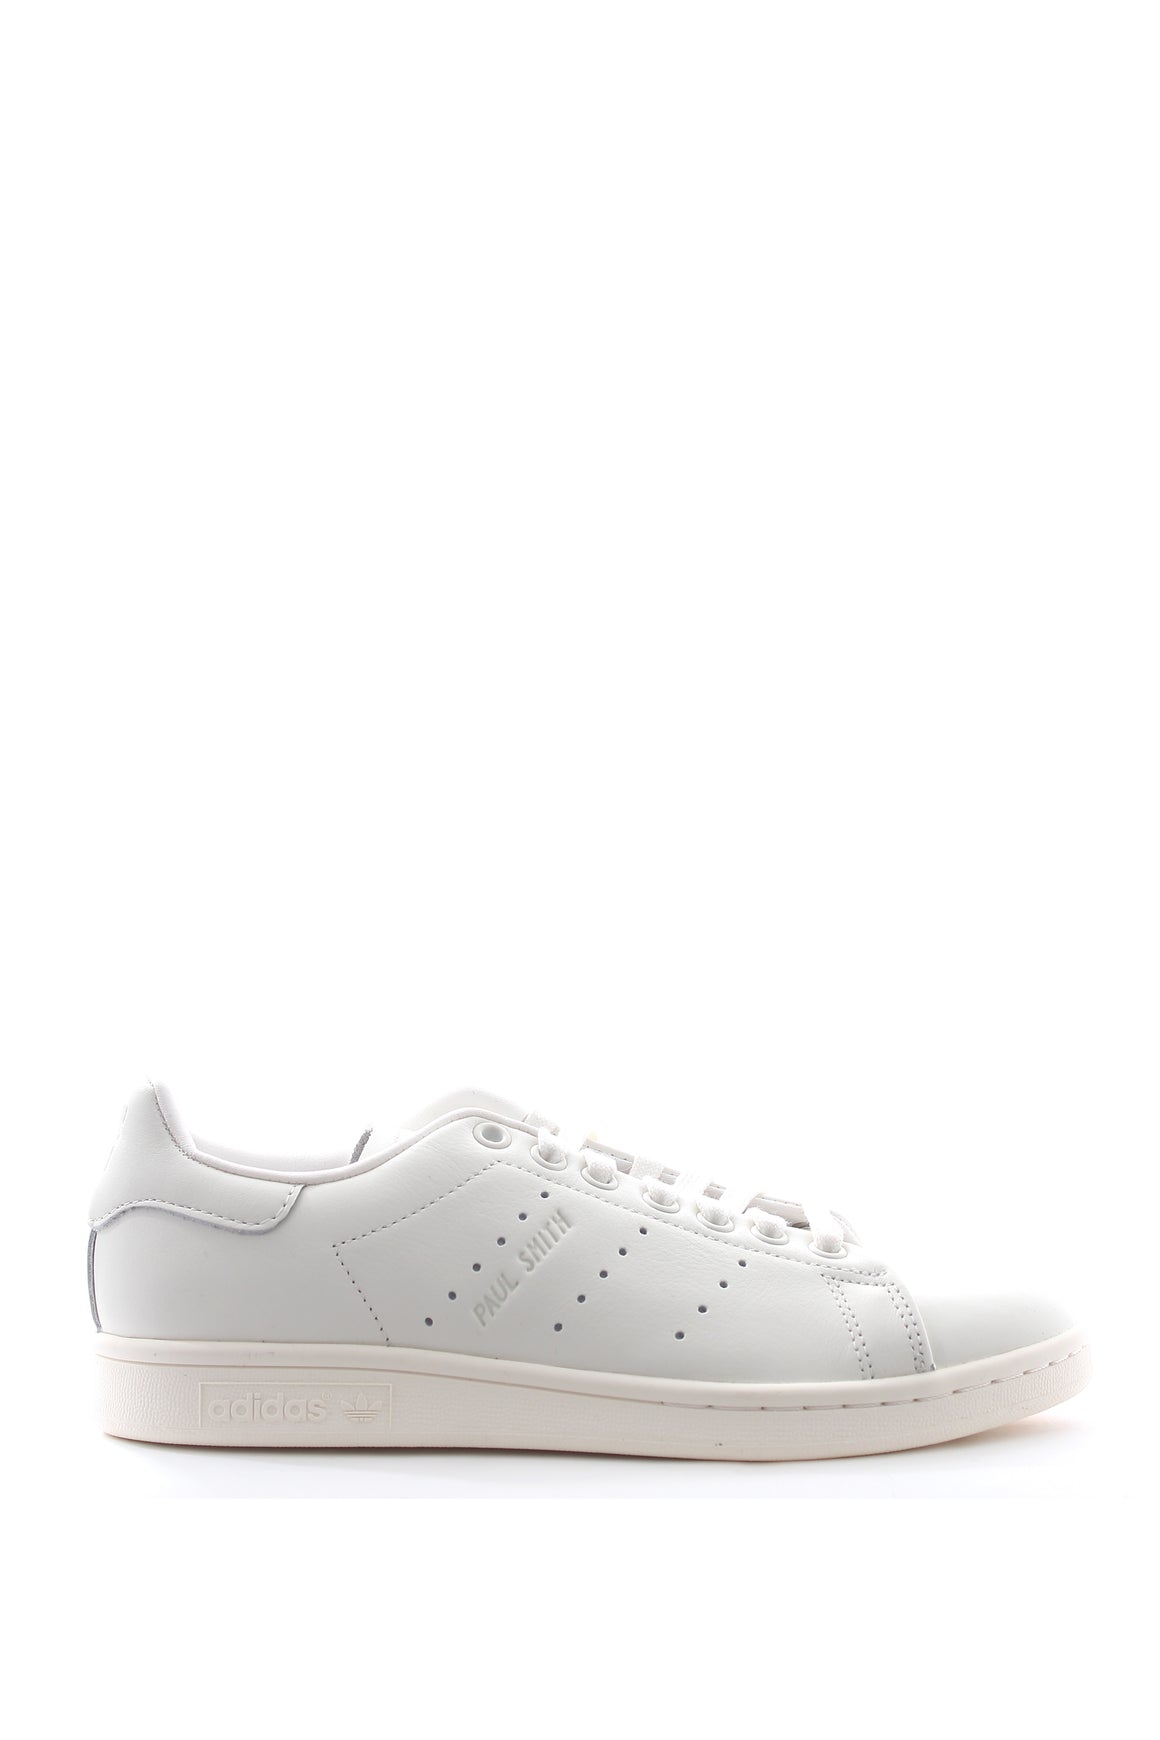 Adidas Stan Smith x Paul Smith x Manchester United Limited Edition White Sneaker